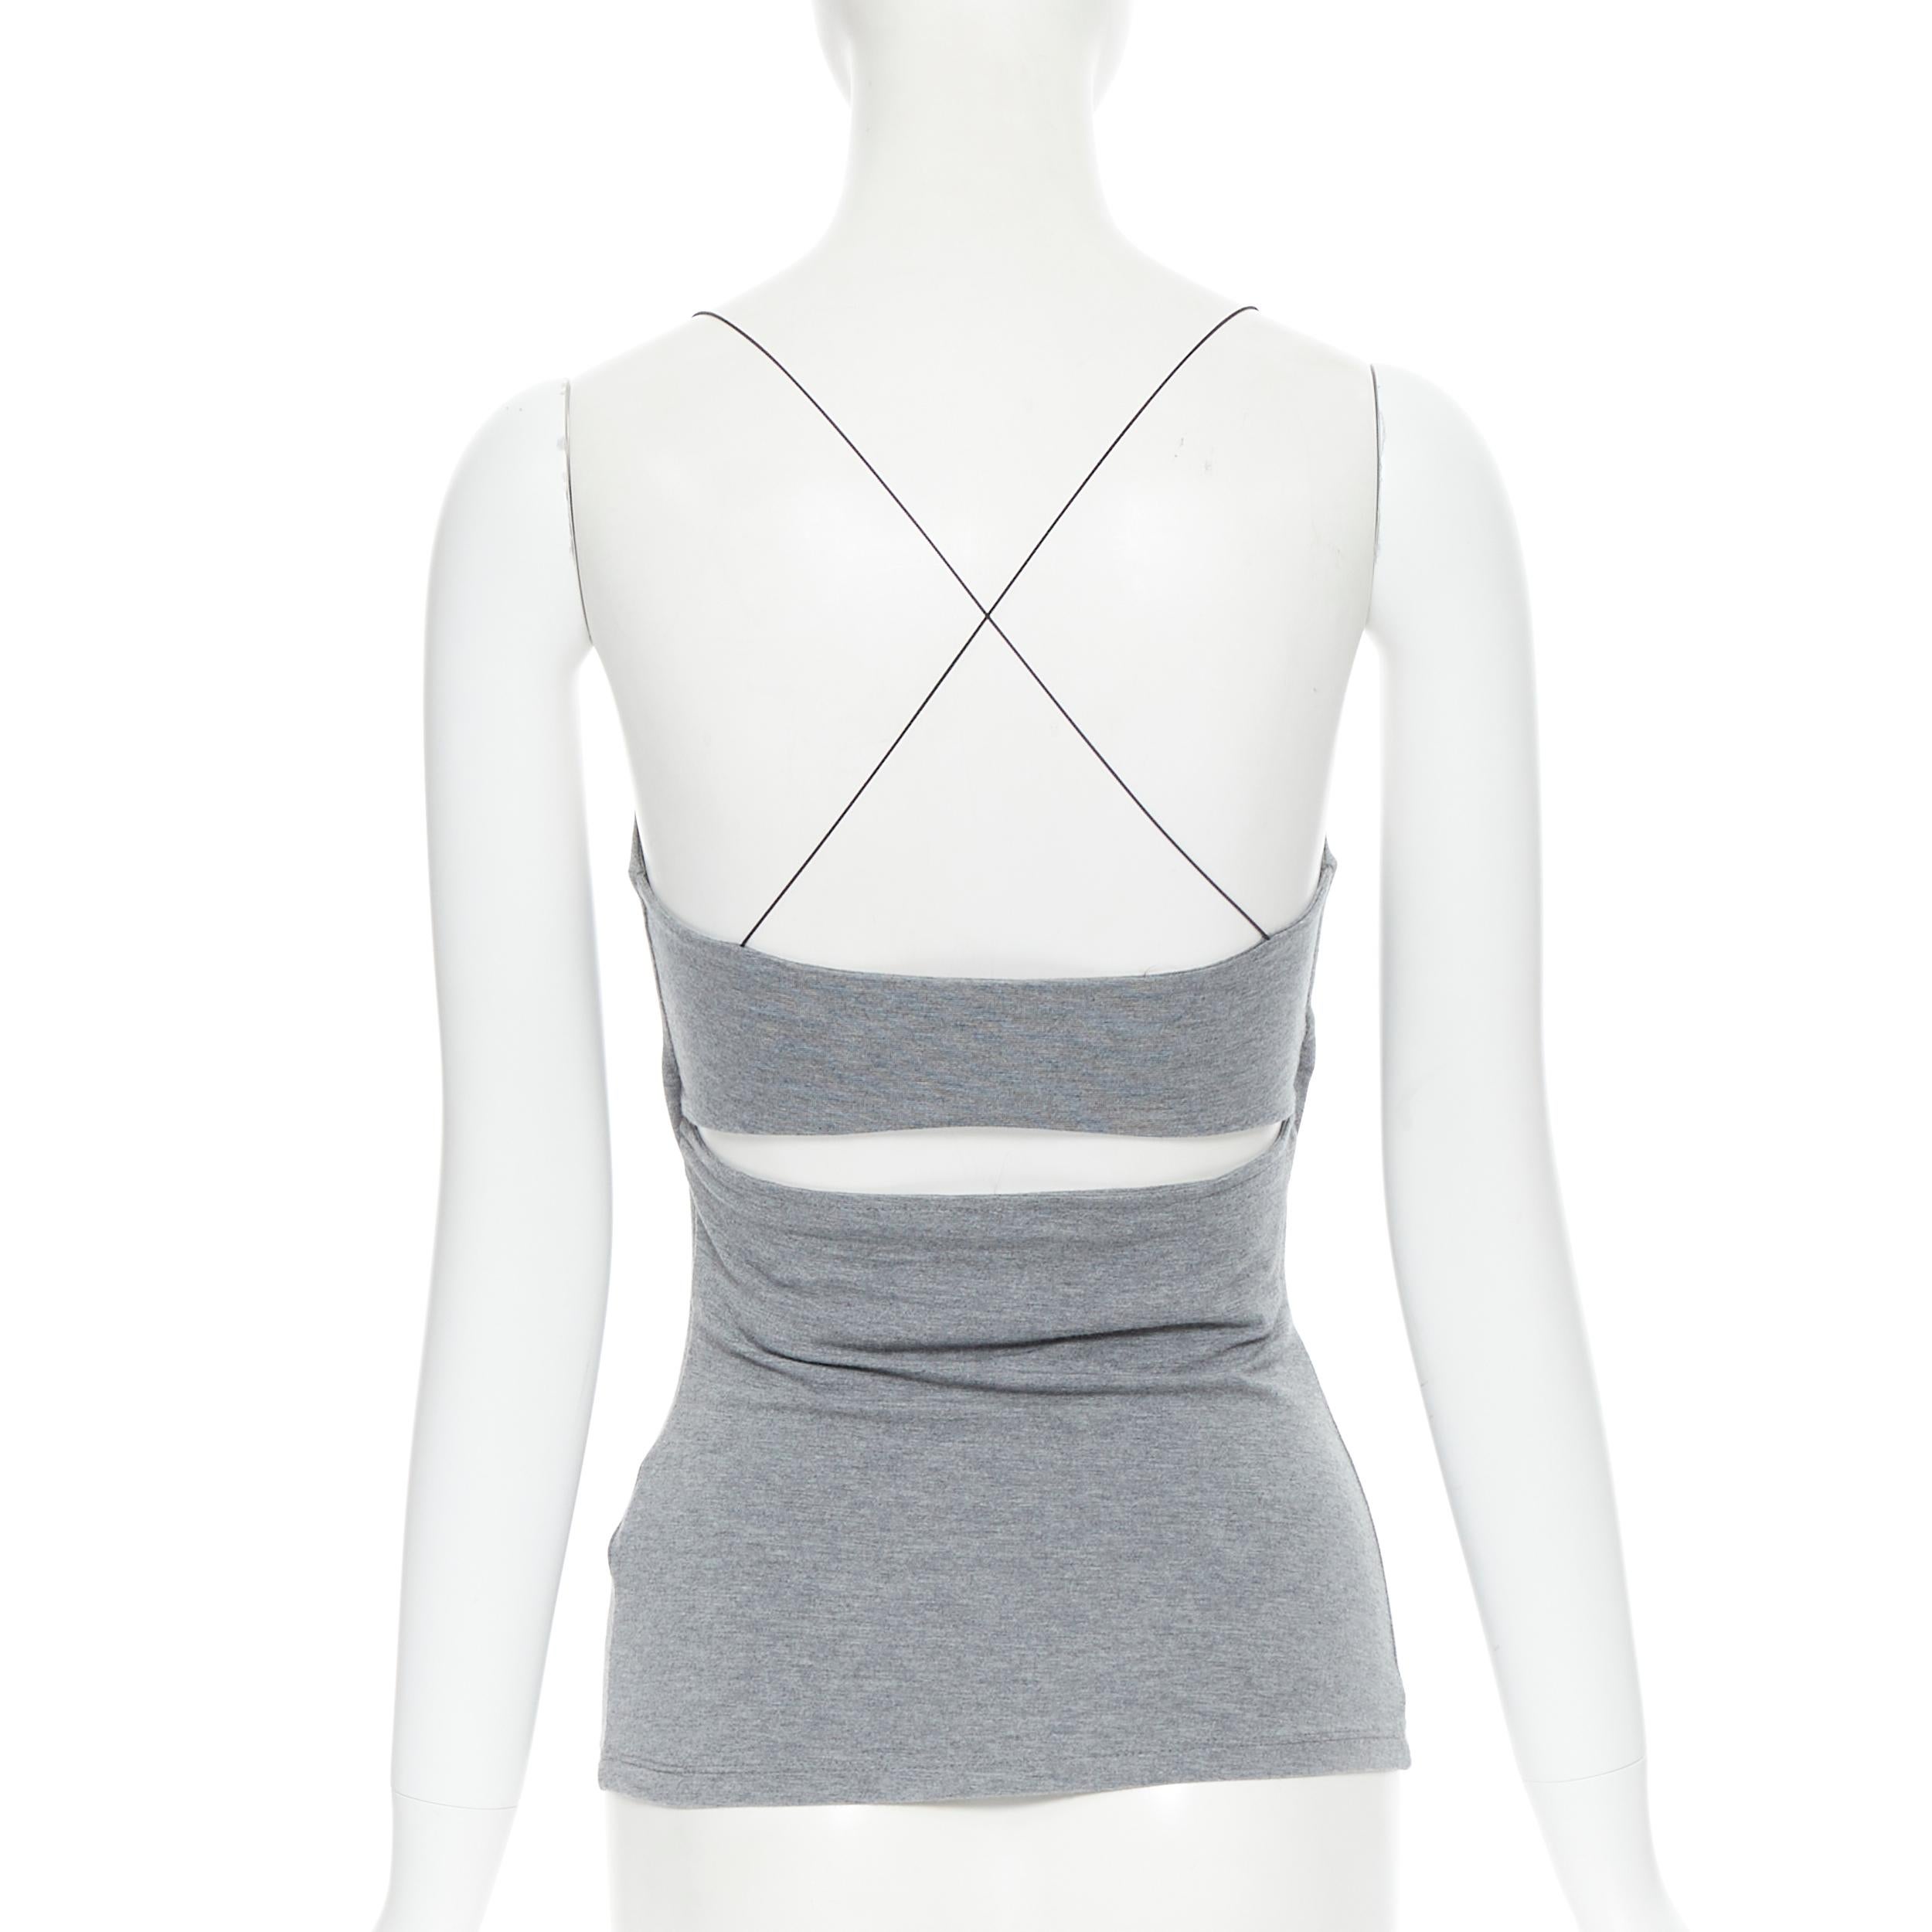 T BY ALEXANDER WANG grey cotton jersey wire spaghetti strap cami tank top XS 
Reference: LNKO/A01737 
Brand: T Alexander Wang 
Designer: Alexander Wang 
Material: Modal 
Color: Grey 
Pattern: Solid 
Extra Detail: Thin wire elasticated spaghetti